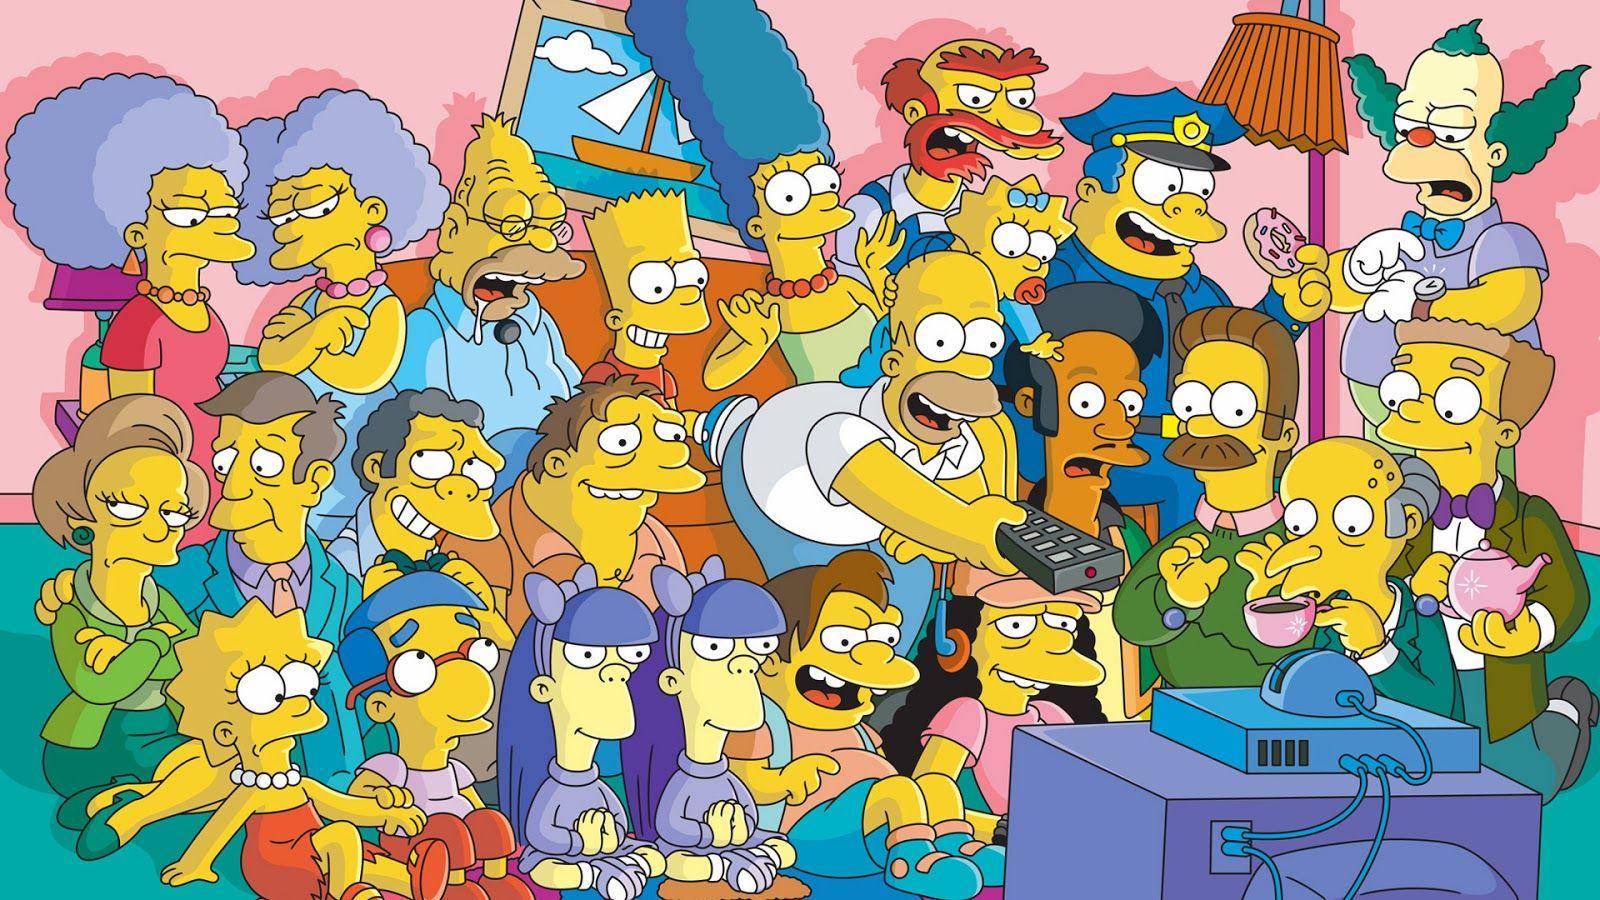 Dedication: A Man Gets 203 Simpsons Characters Tatted On His Back